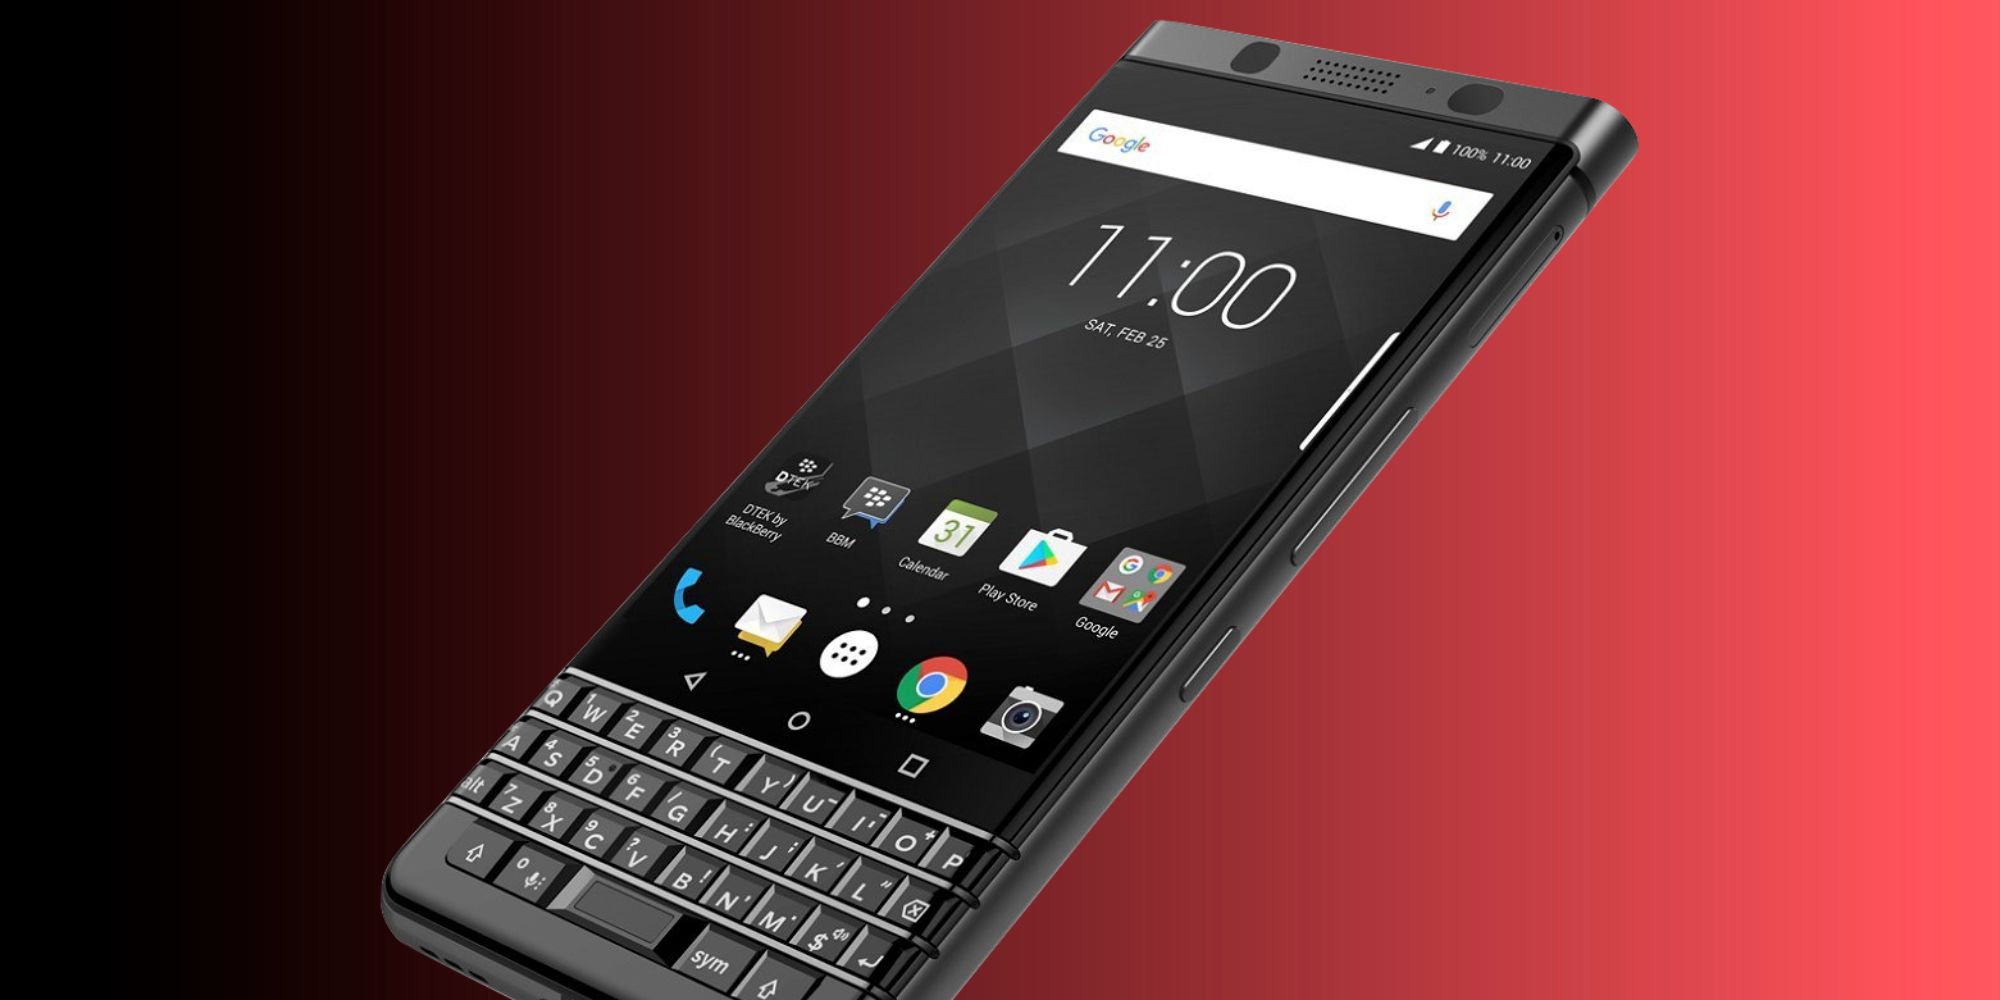 A New BlackBerry Phone Is Coming Soon, But Why?